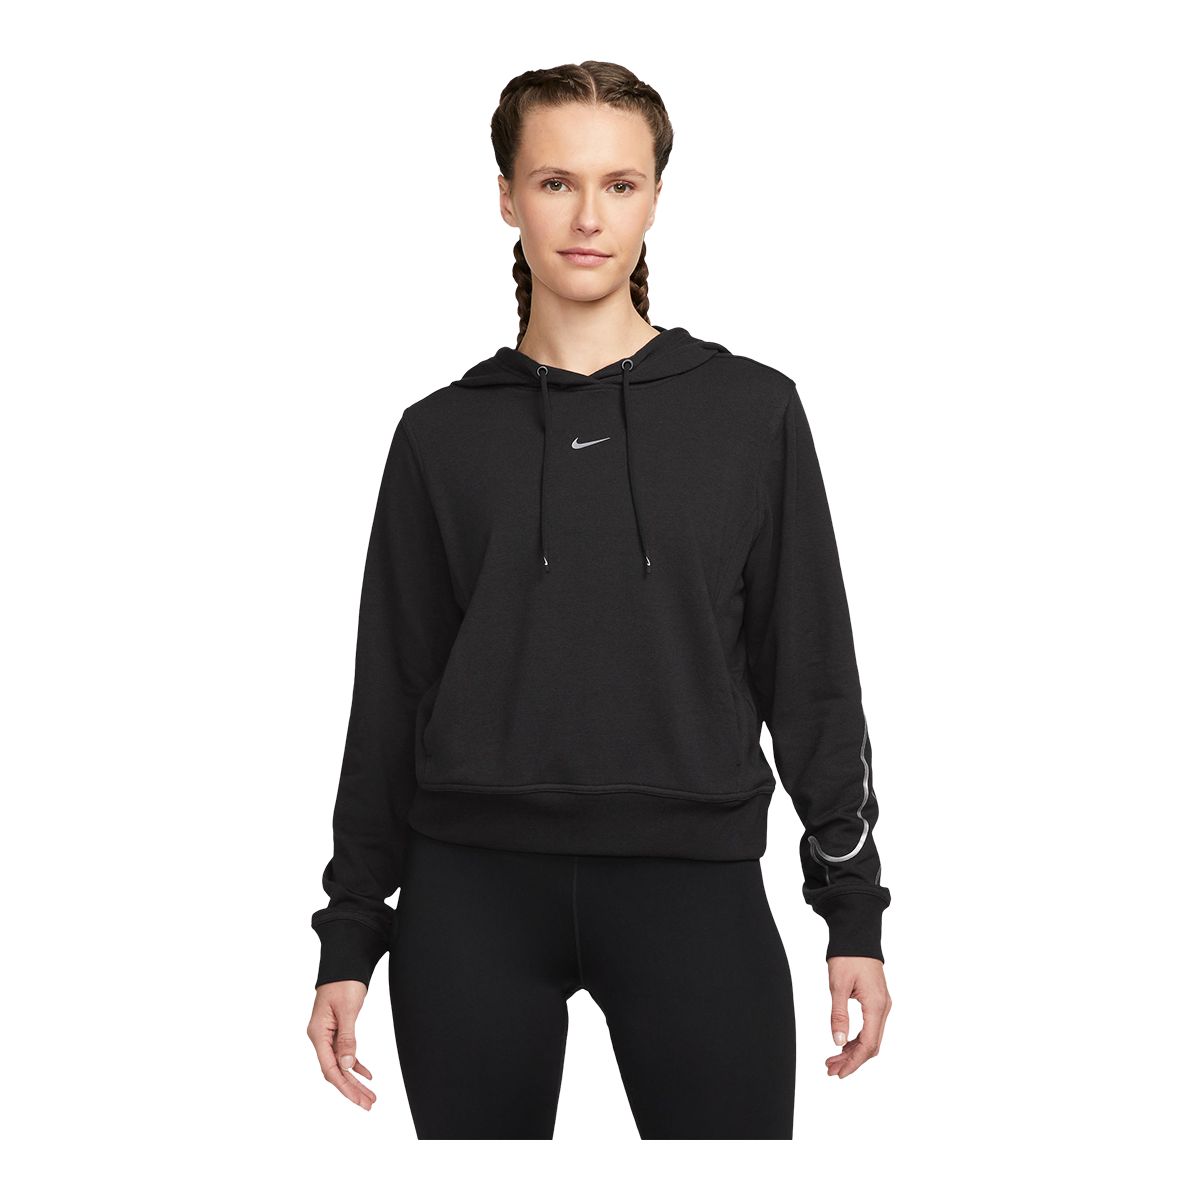 Image of Nike Women's One Shine Dri-FIT Pullover Hoodie